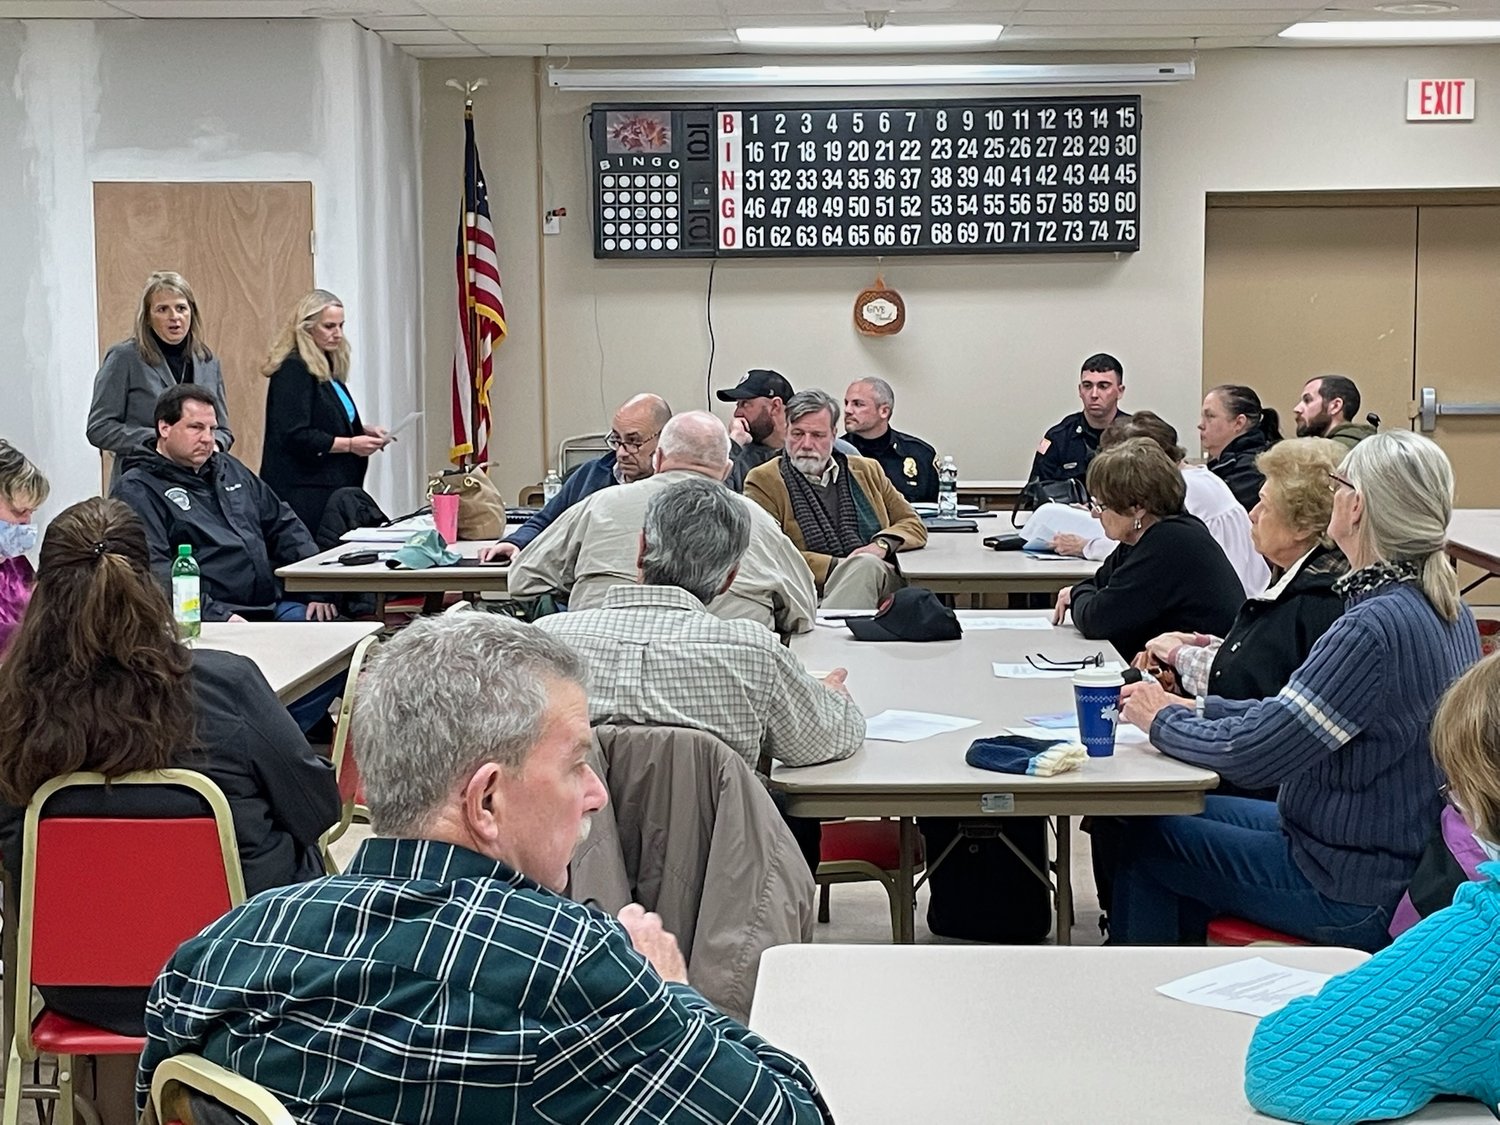 Rome Common Council President Stephanie Viscelli and Third Ward Councilor Kimberly Rogers, both at back left, address a group of residents and members of the city’s police and codes departments to open Rome’s first Public Safety Meeting on Wednesday night at the South Rome Senior Center.